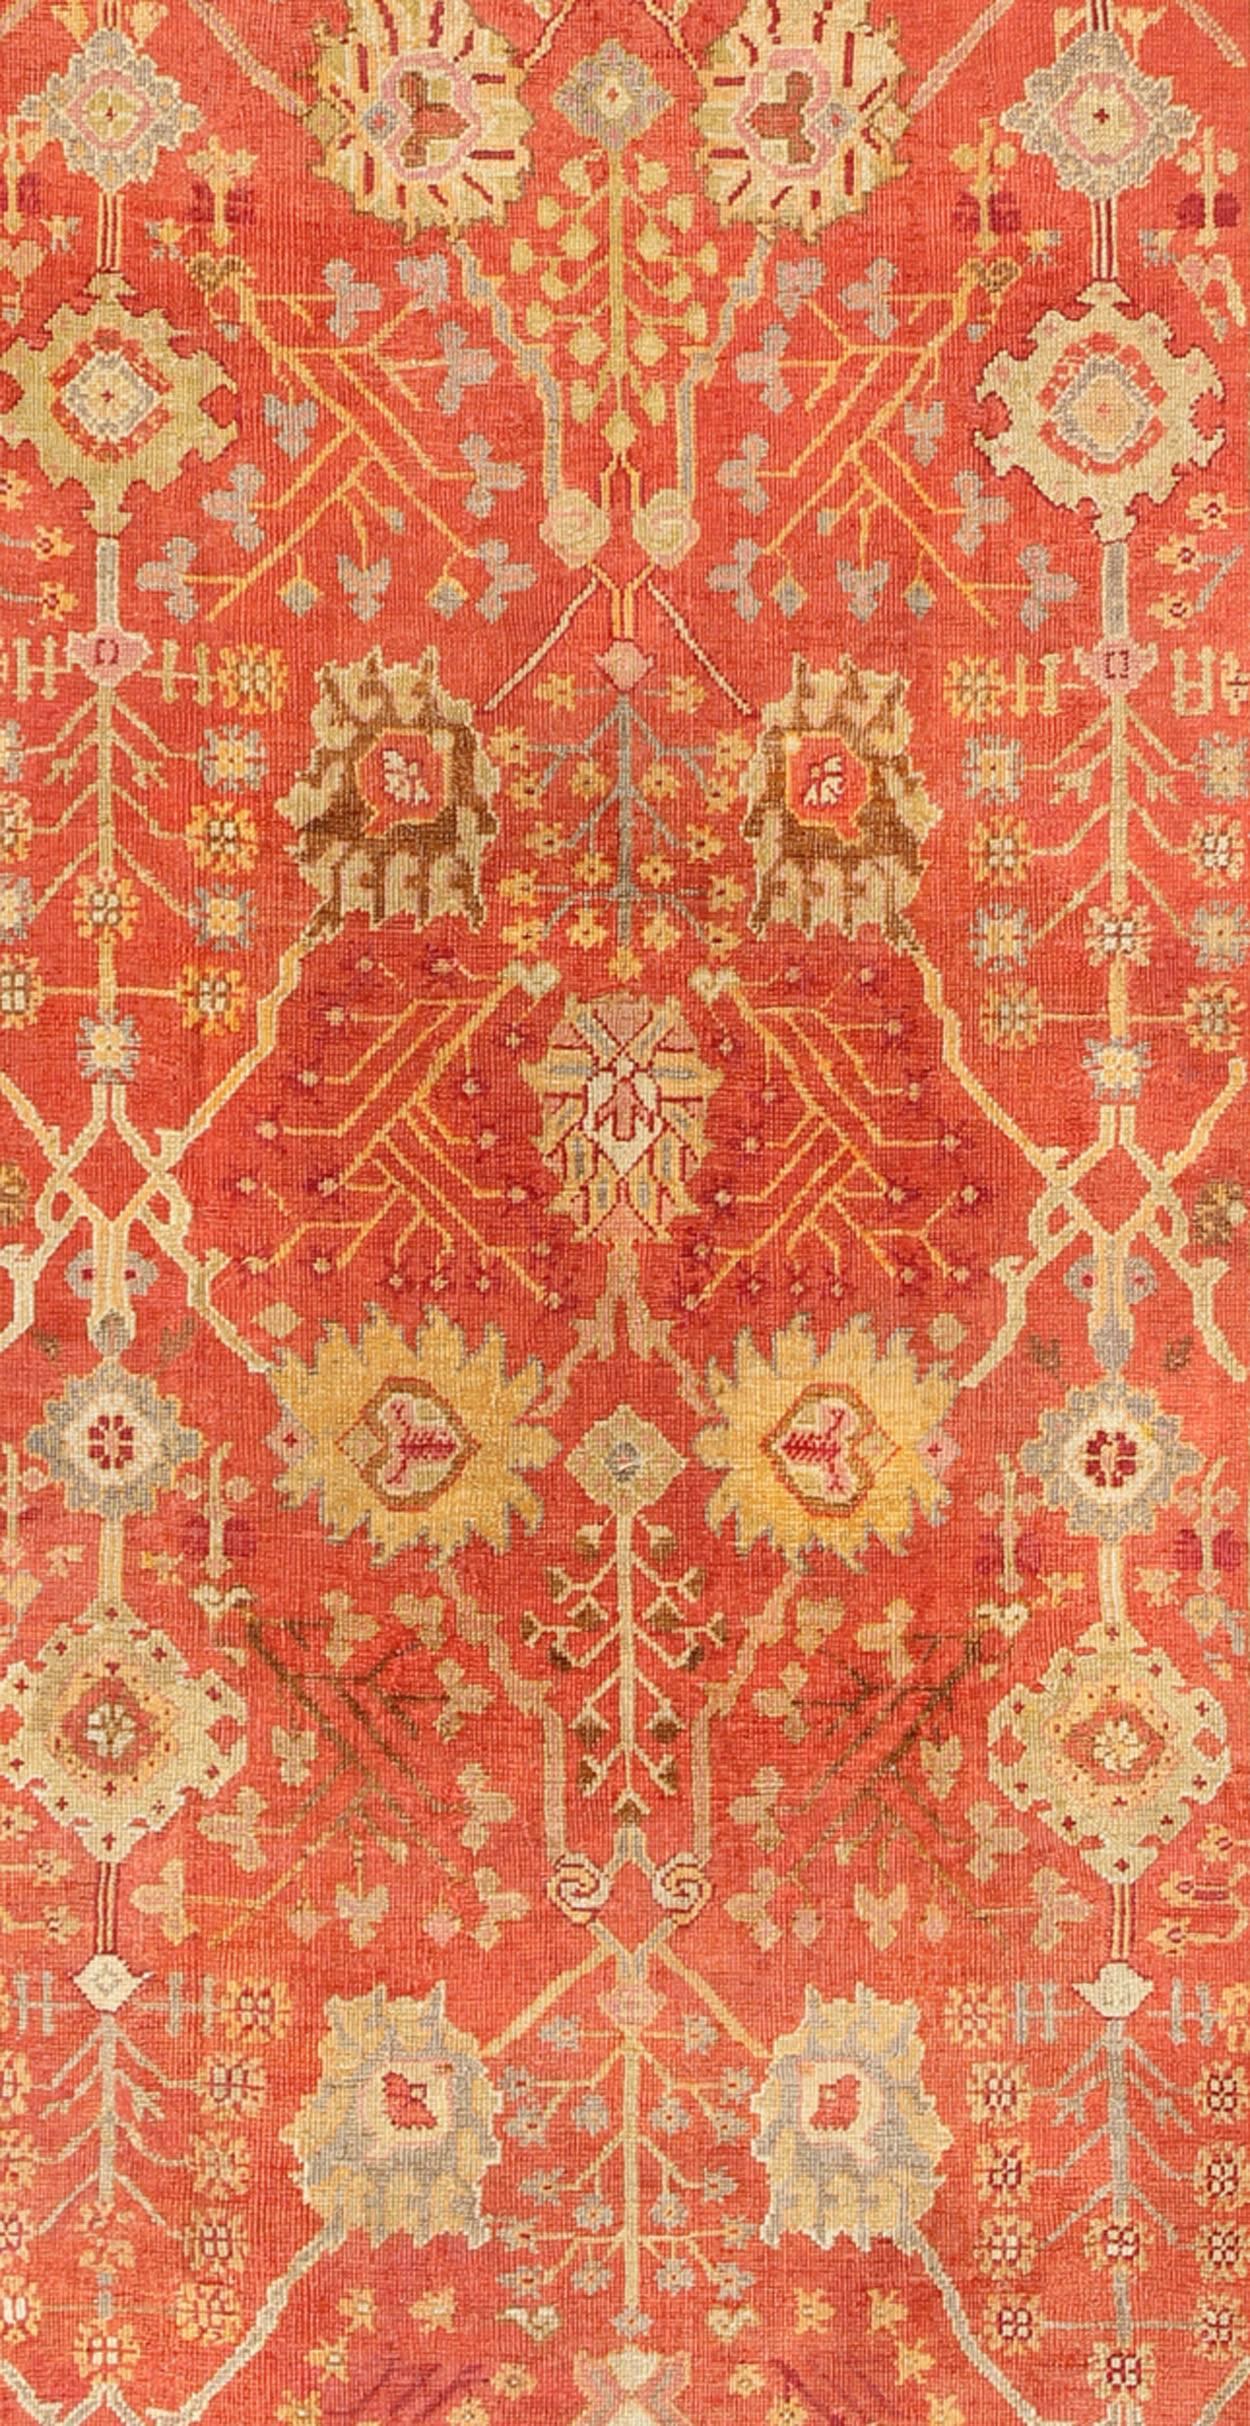 Hand-Knotted  Antique Turkish Oushak Rug With All-Over Design On Orange Red Gray Border For Sale